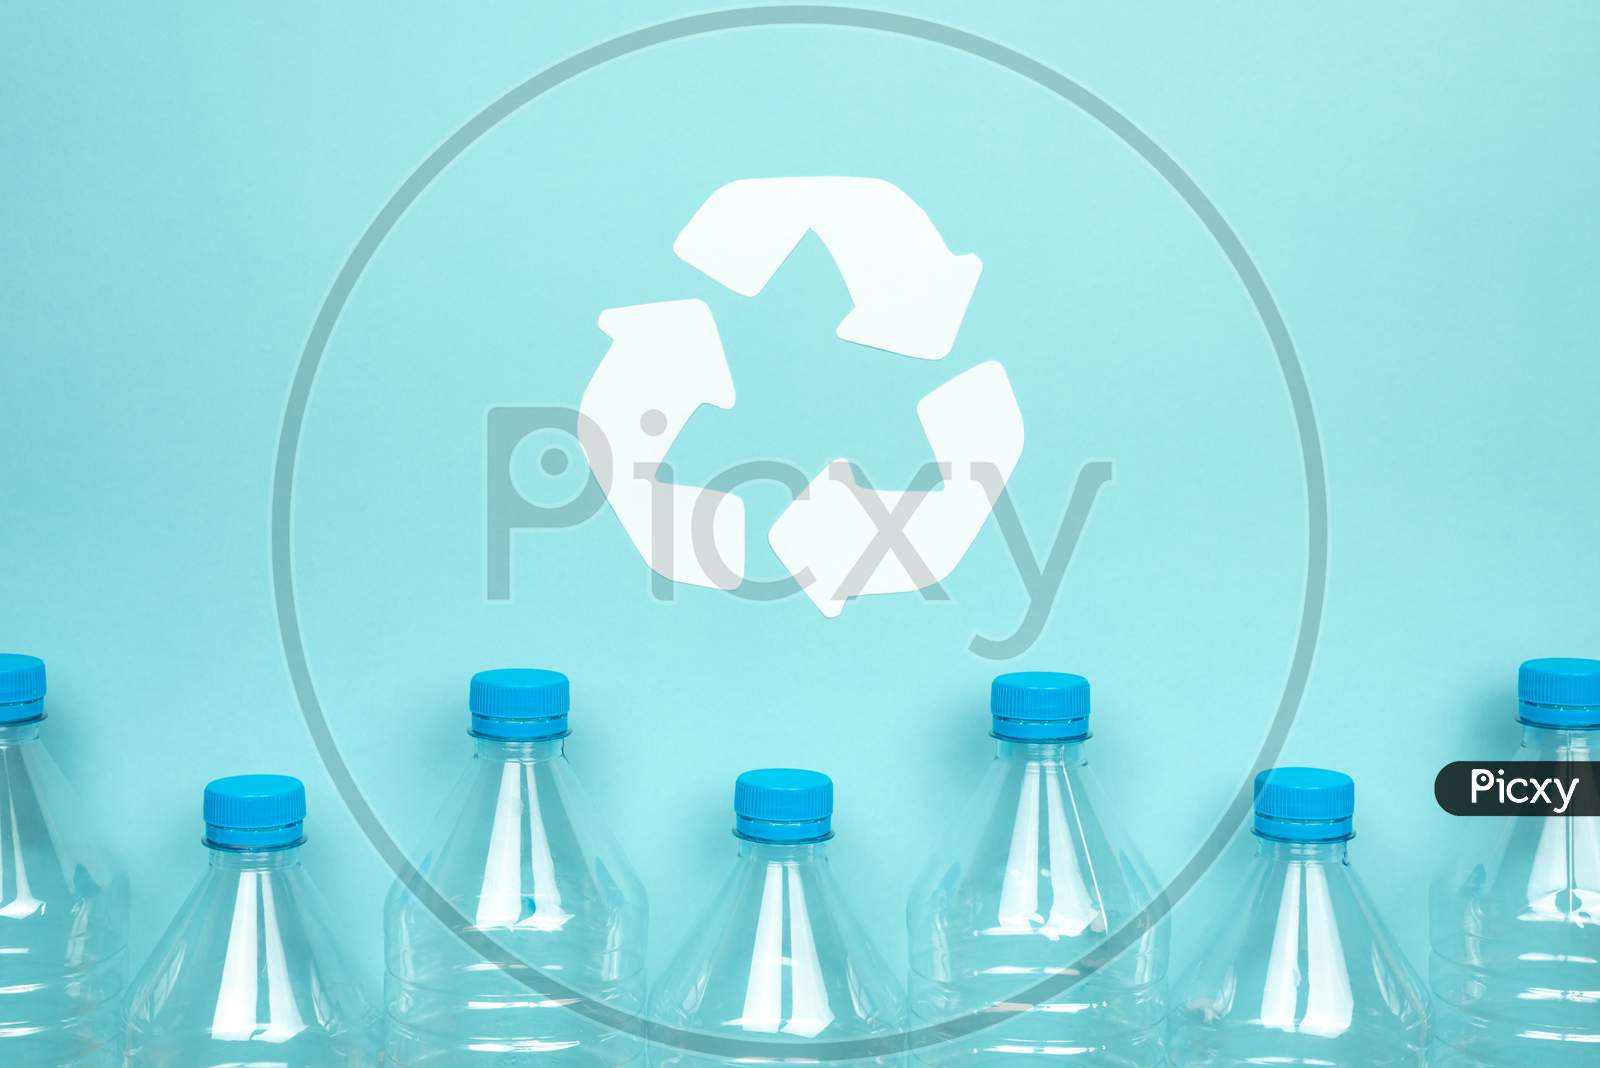 Clear Plastic Bottles With Caps On A Blue Background. Recycling And Environment Concept.